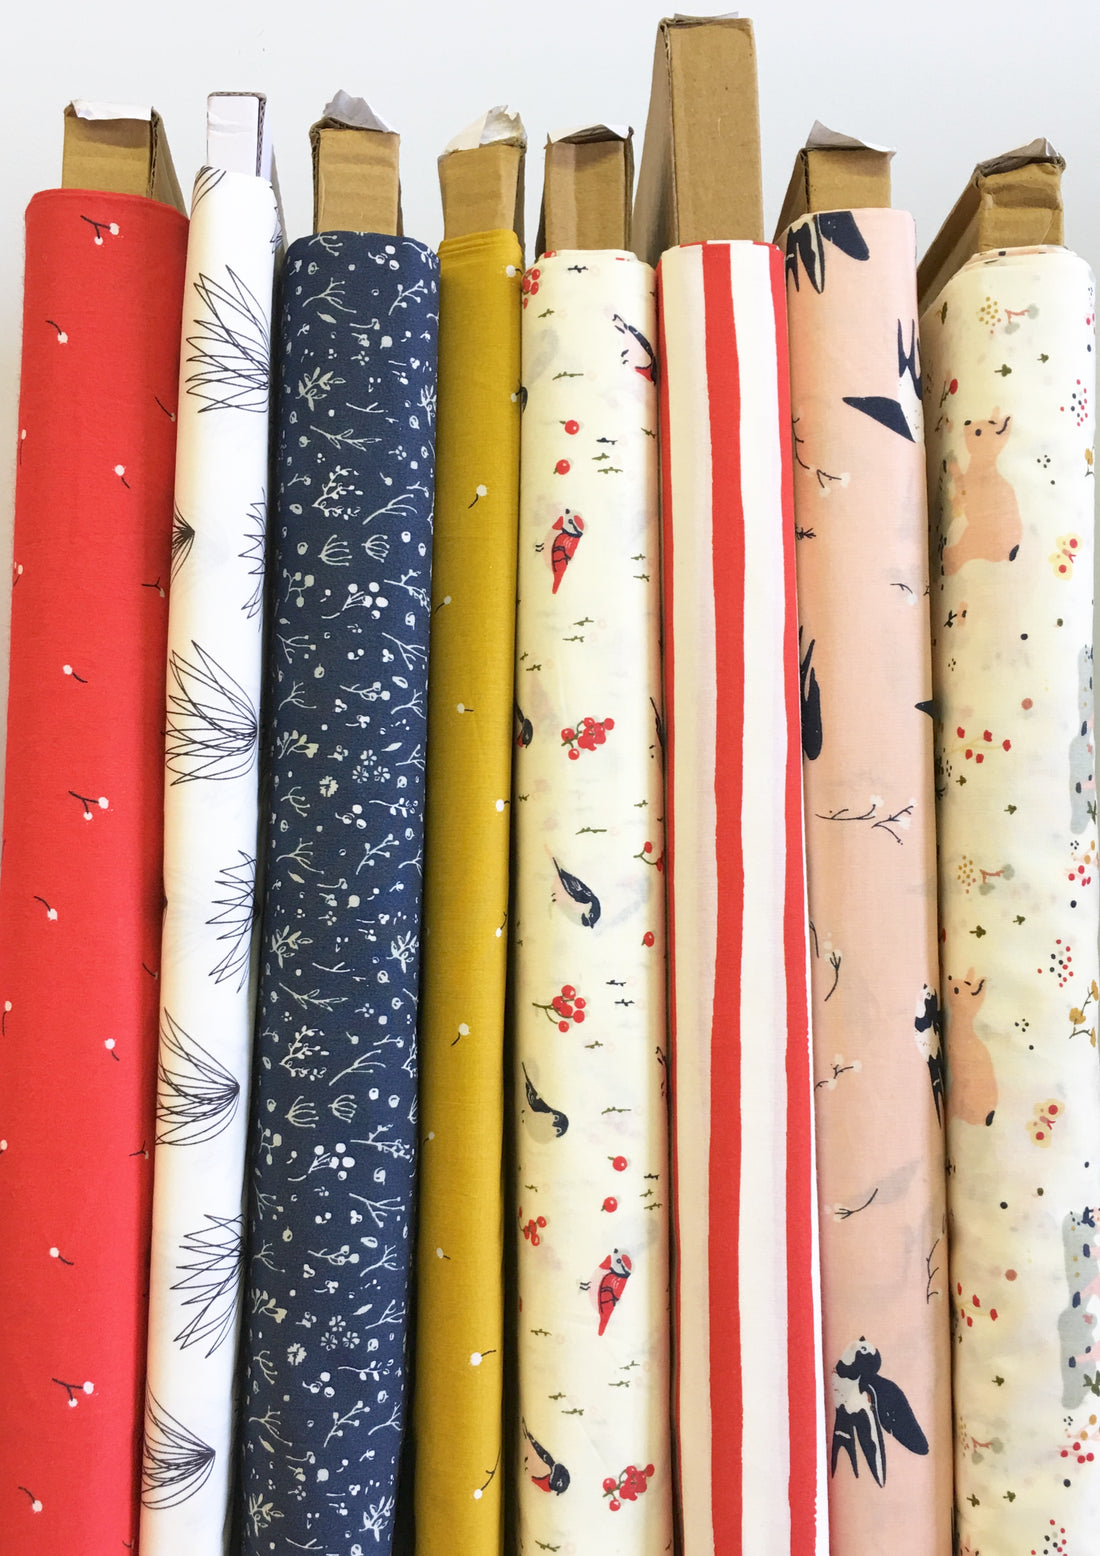 New Fabric, Restockings, and More!